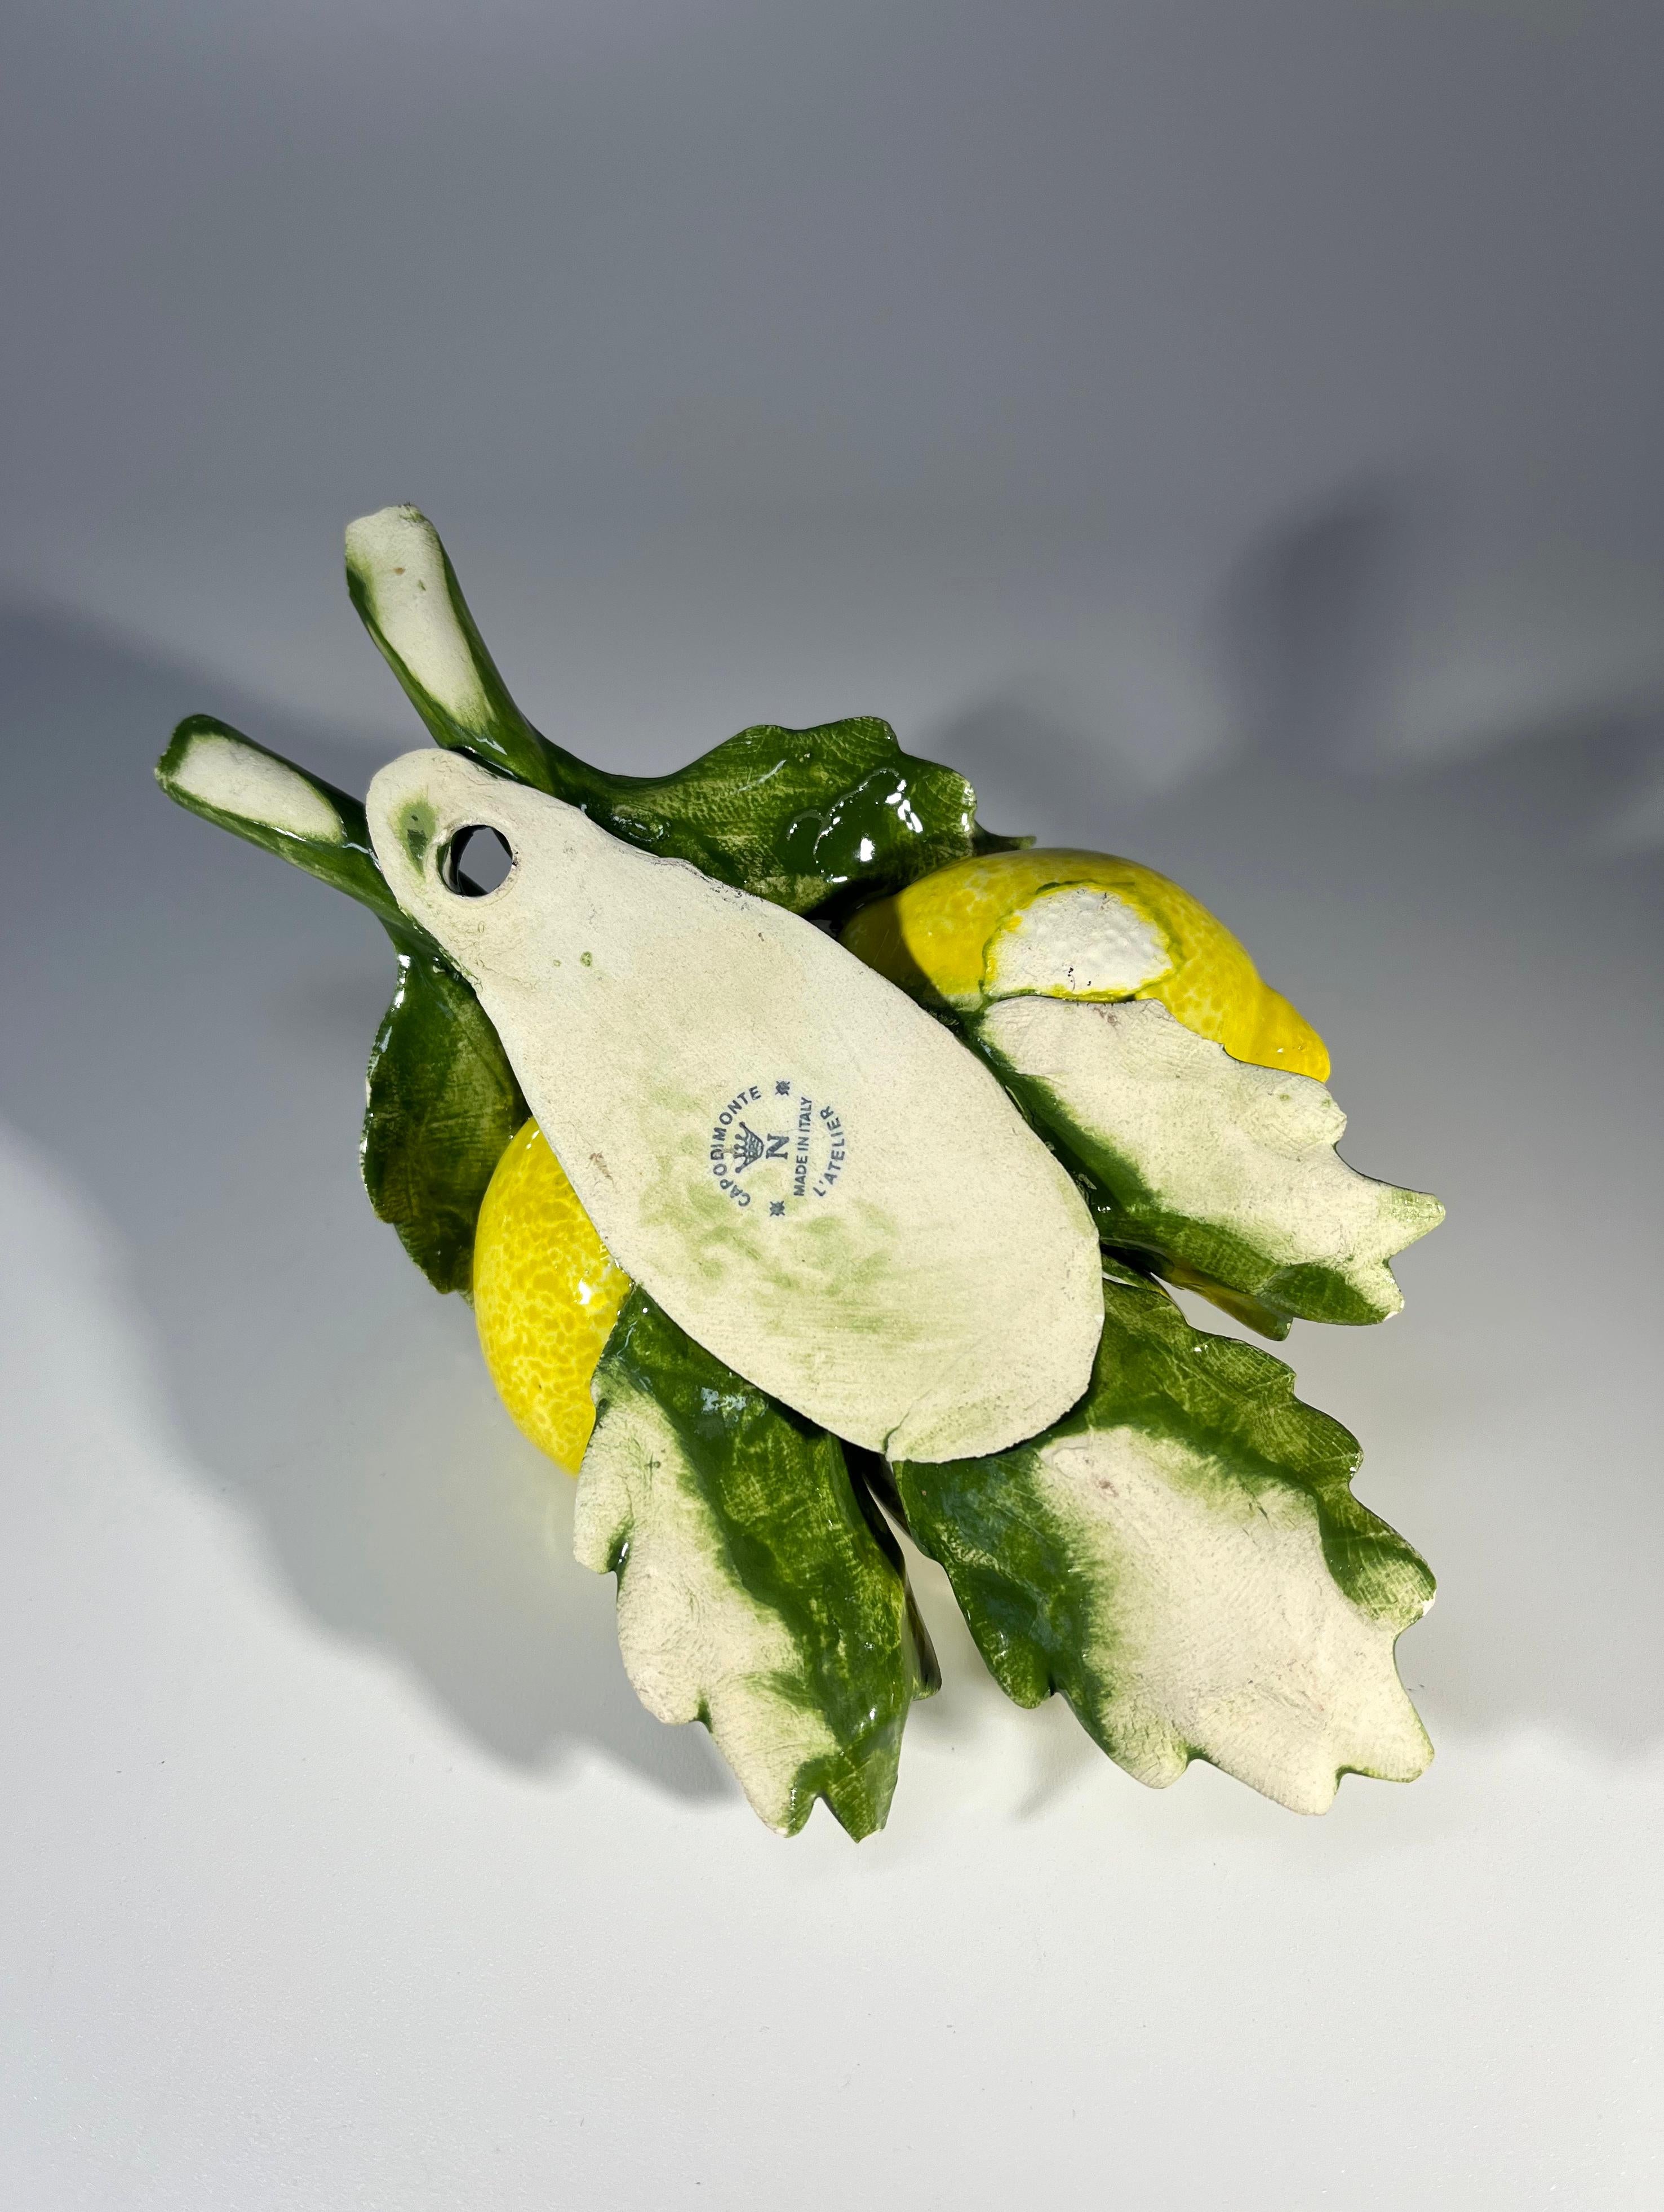 Ceramic Delicate And Fresh Lemons, Porcelain Wall Decor By Capodimonte L'Atelier, Italy For Sale